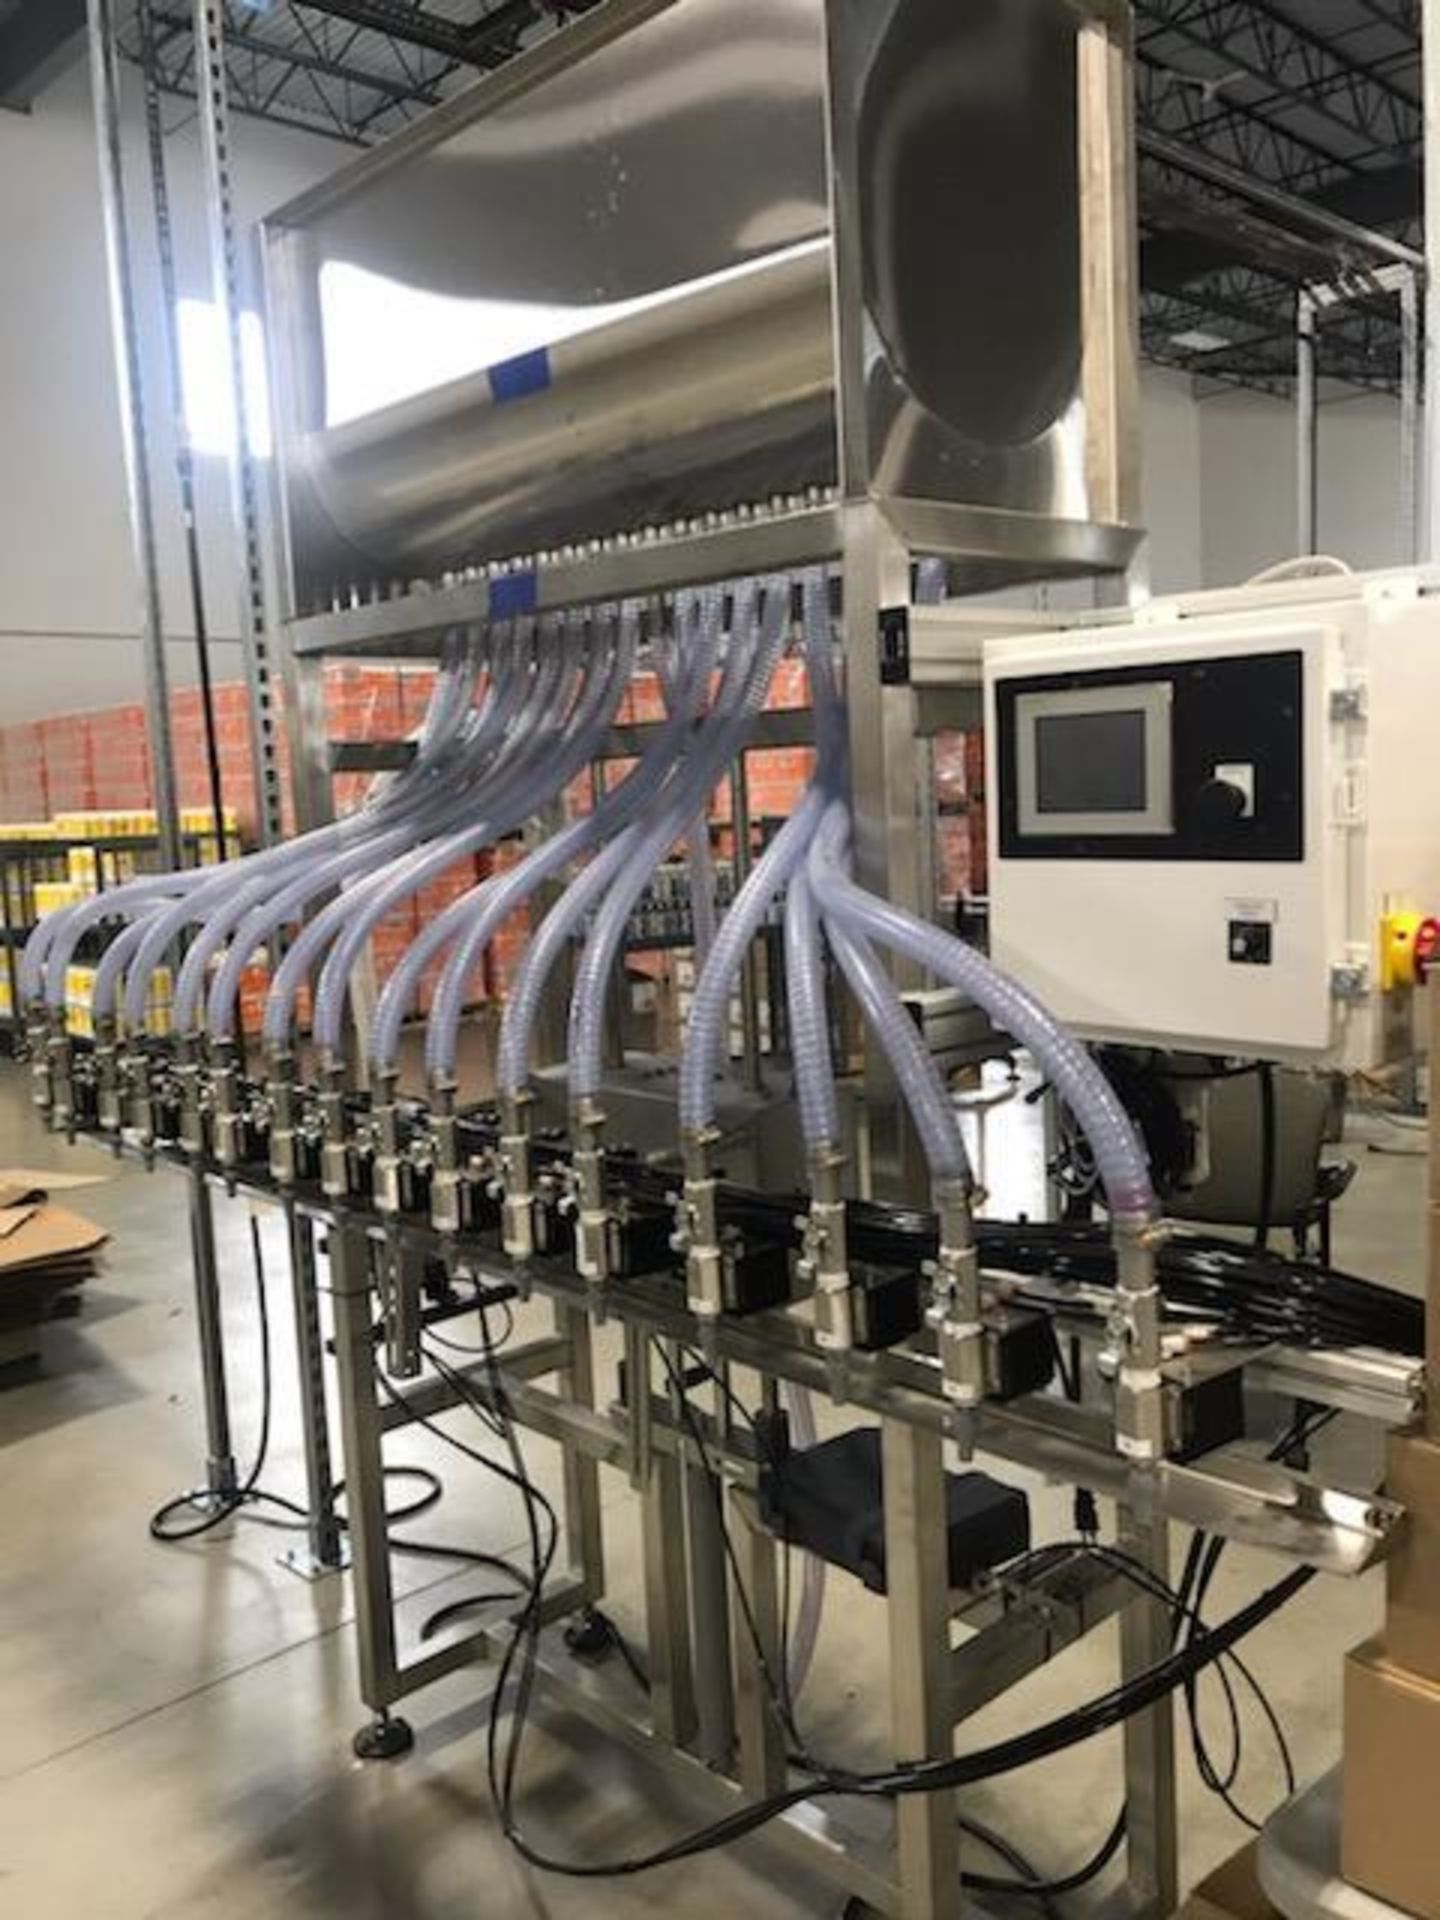 ELF 16-HEAD AUTOMATIC GRAVITY FILLER, REFURBISHED IN 2021 - Image 6 of 7